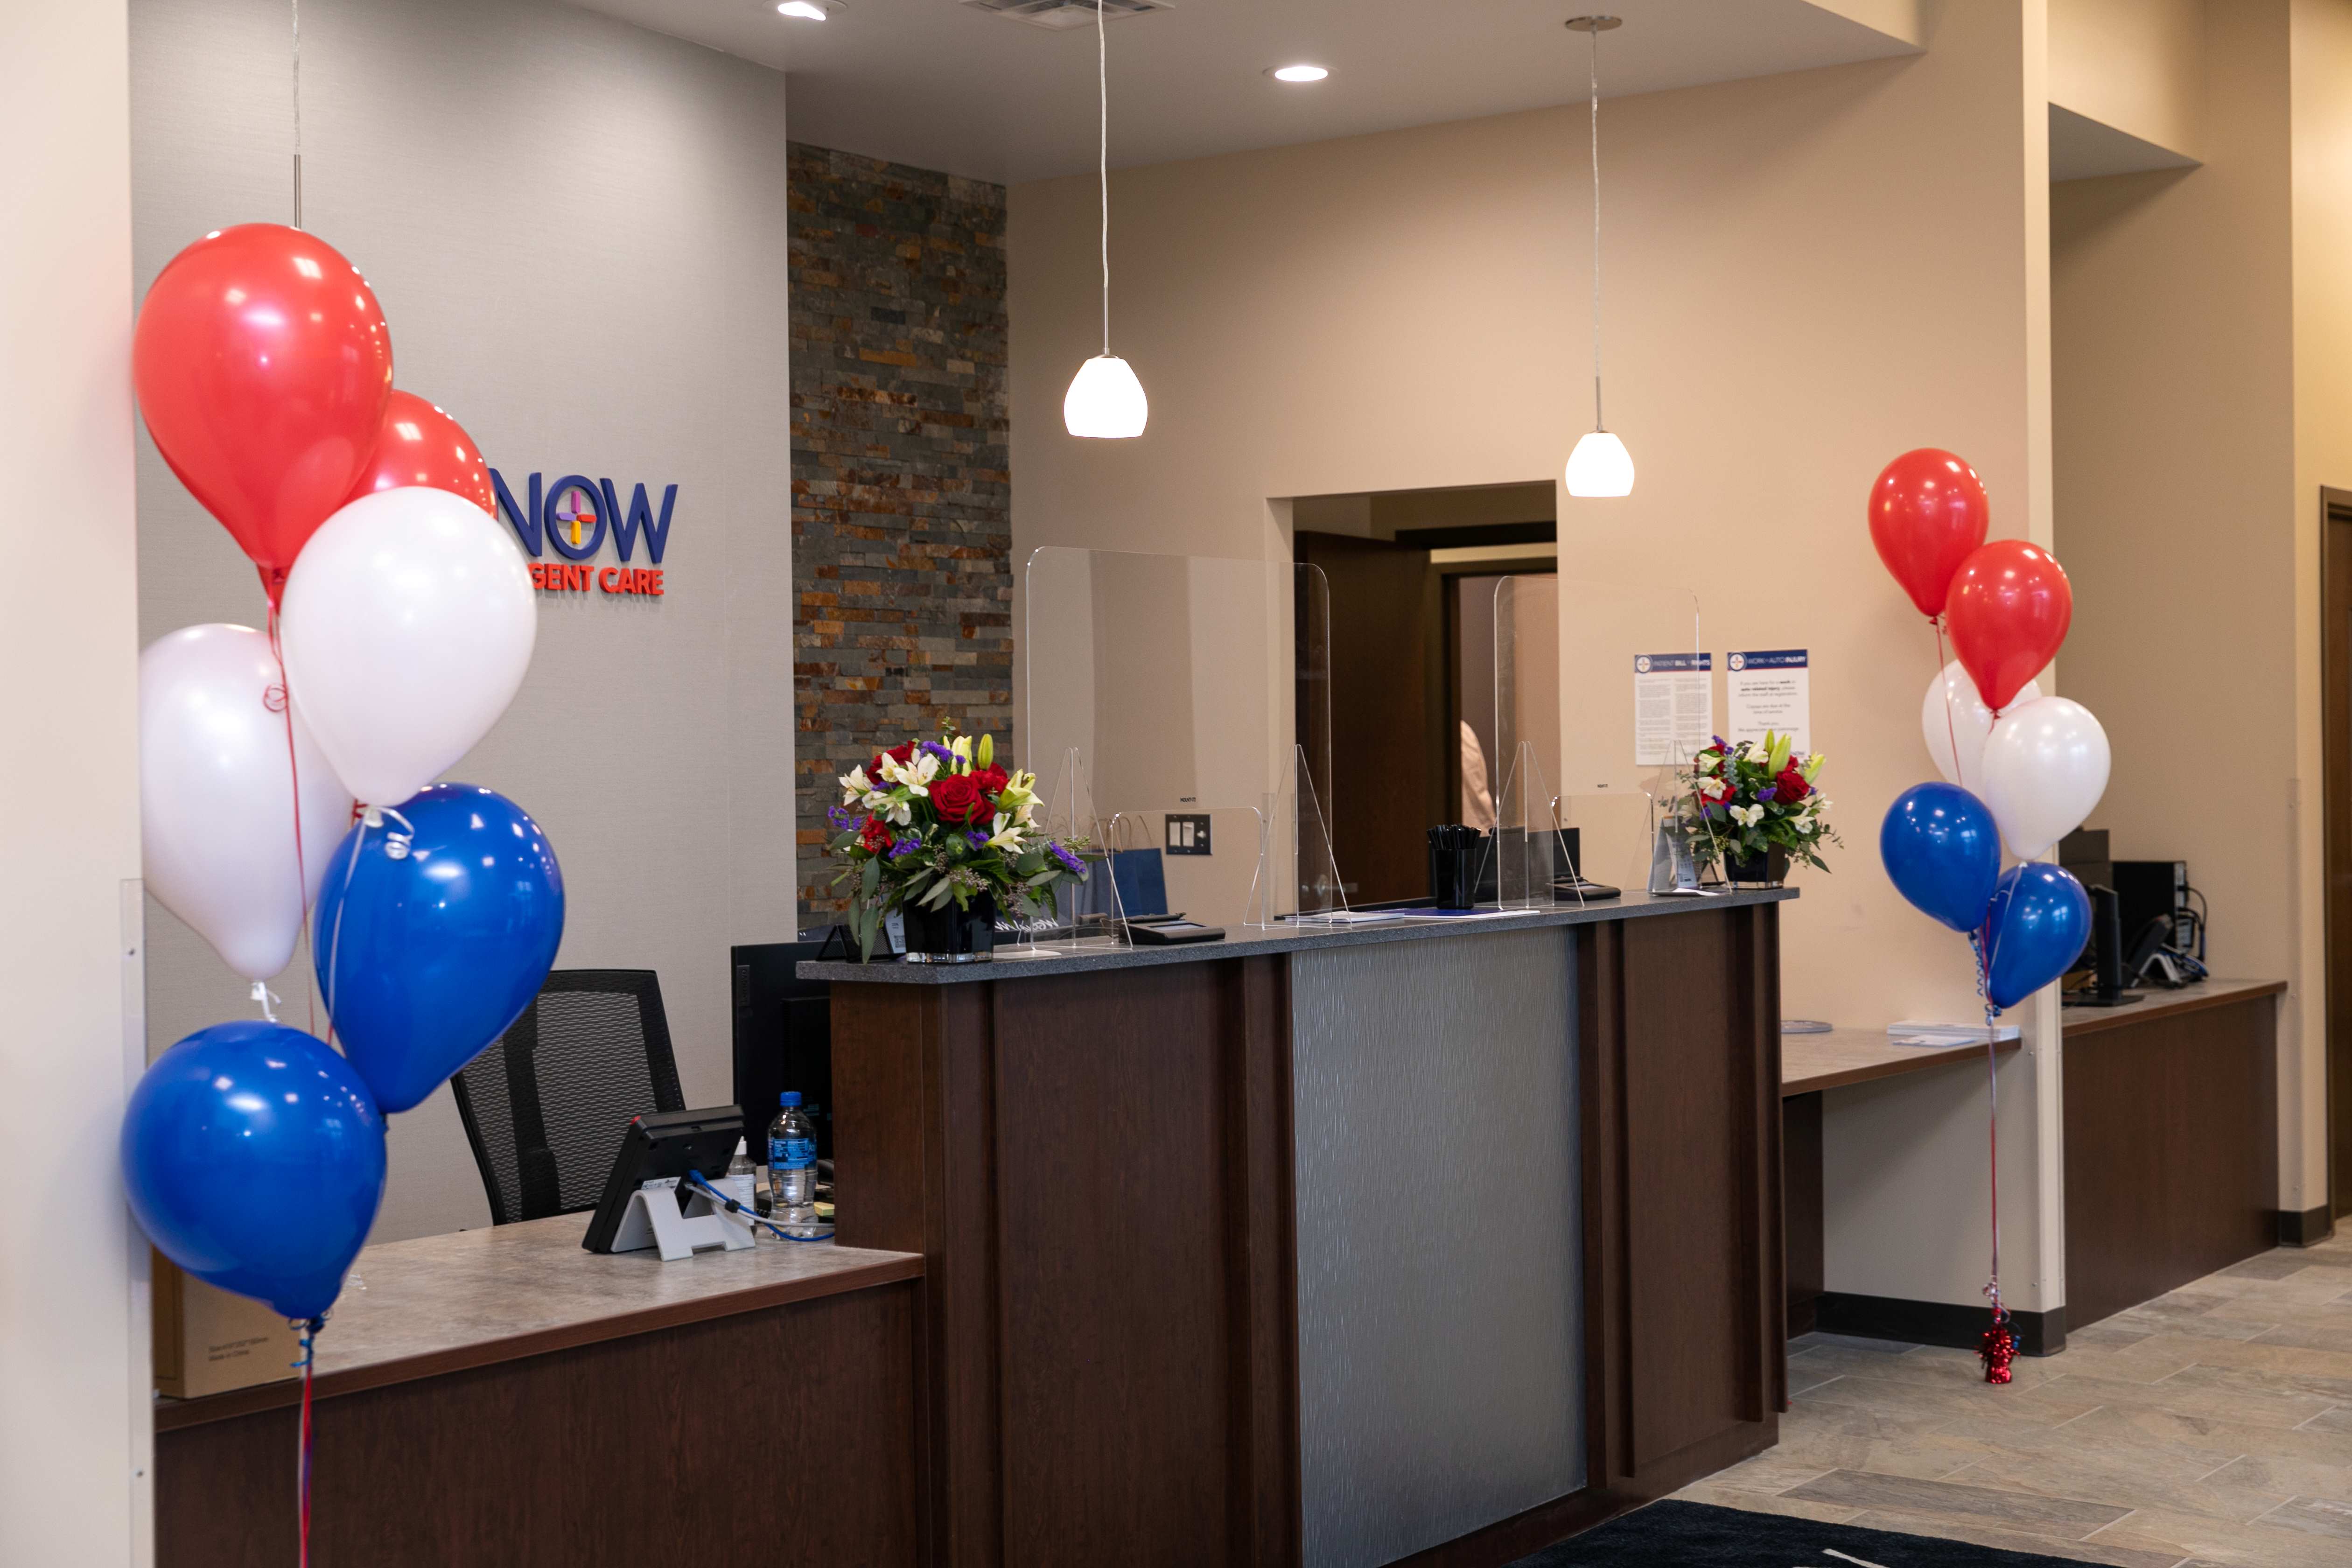 WellNow Urgent Care provides walk-in treatment for illnesses and injuries, wellness exams, and employer health services